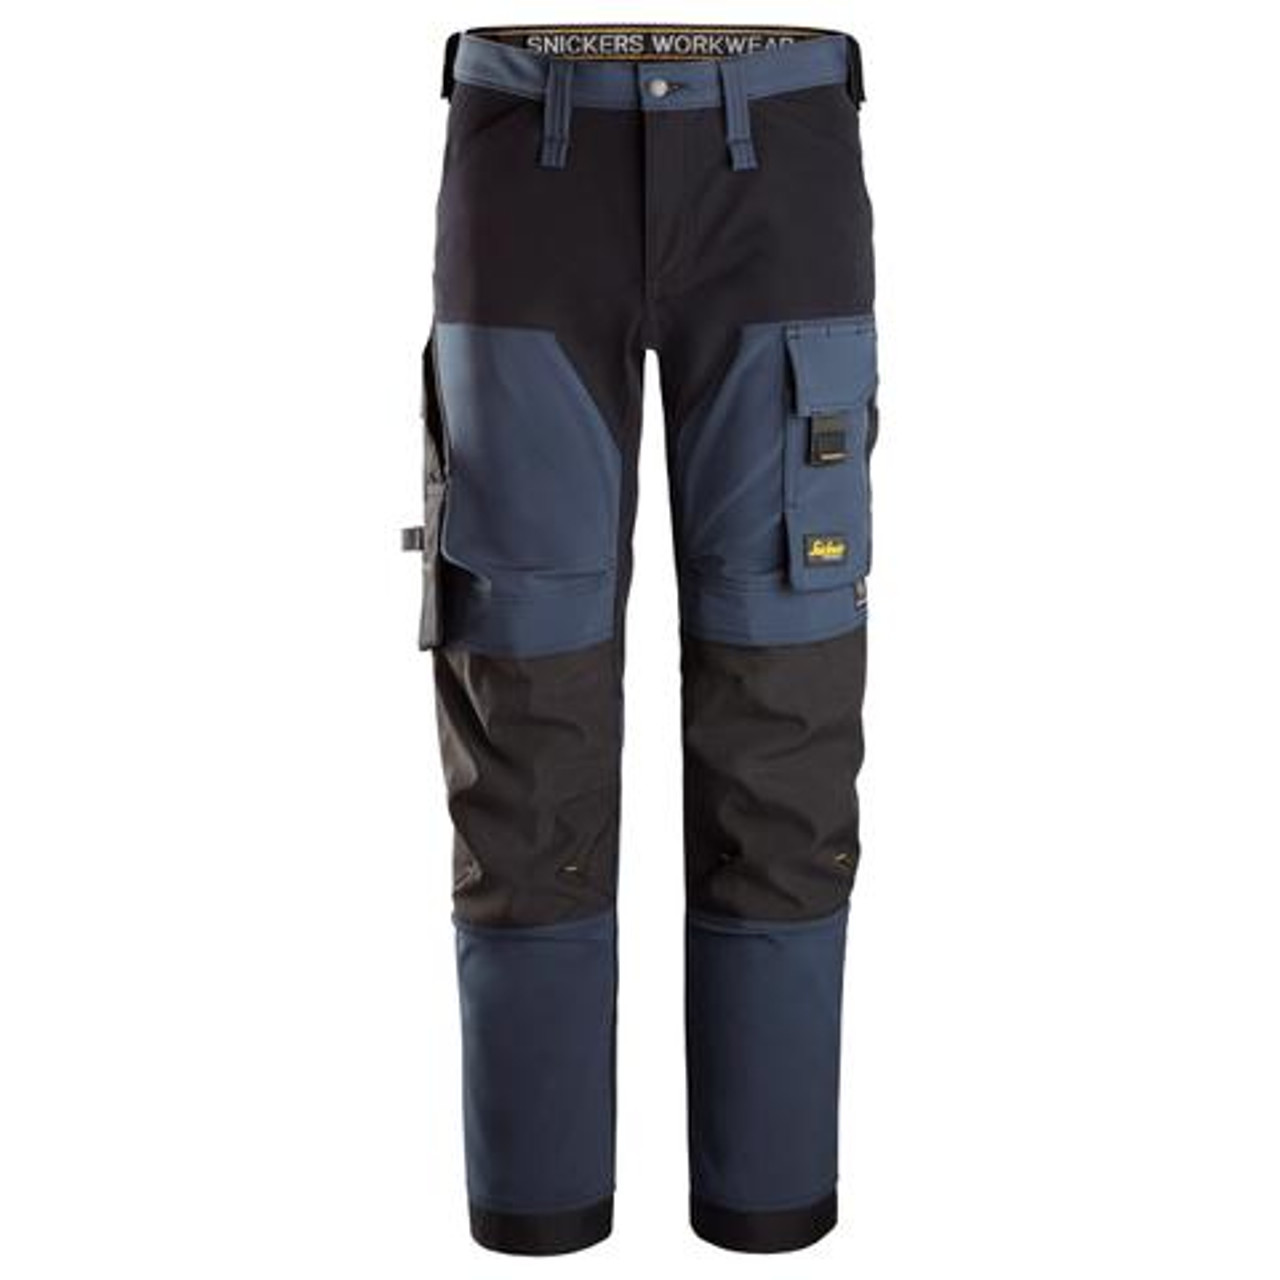 Buy online in Australia, New Zealand and Canada SNICKERS Trousers for Floorlayers that have Kneepad Pockets